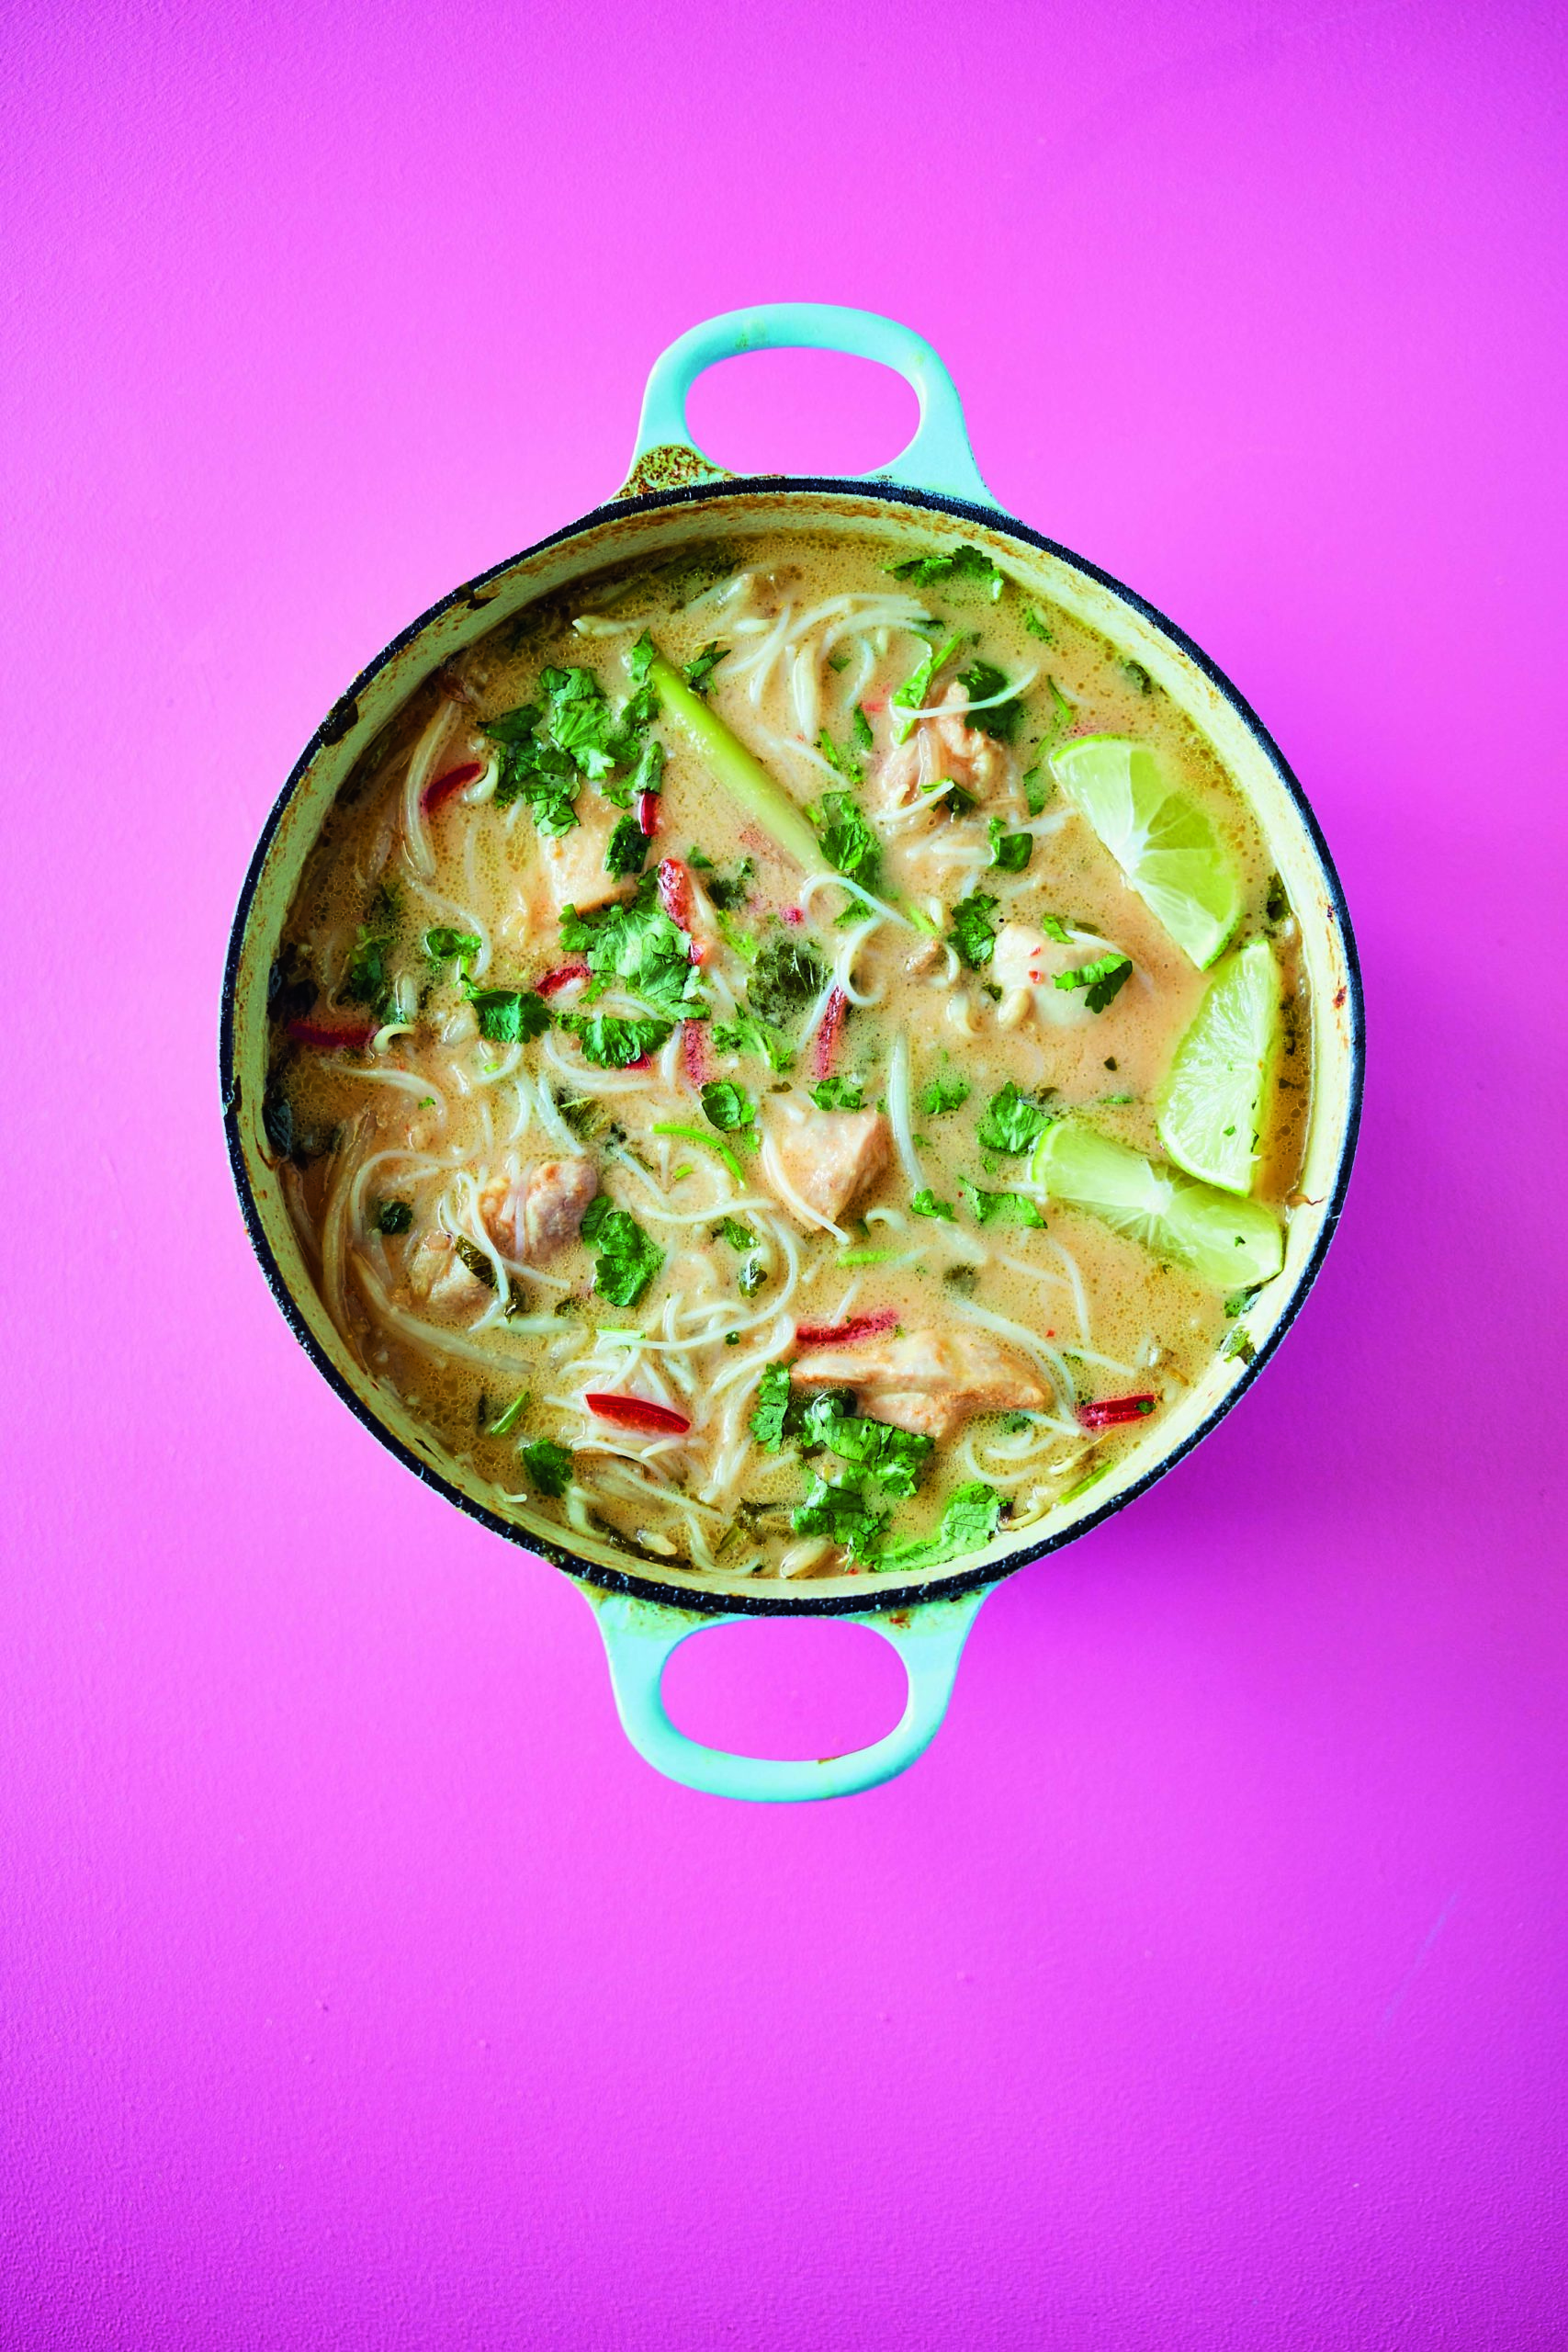 Rukmini Iyer’s Malaysian Chicken Laksa with Beansprouts and Noodles